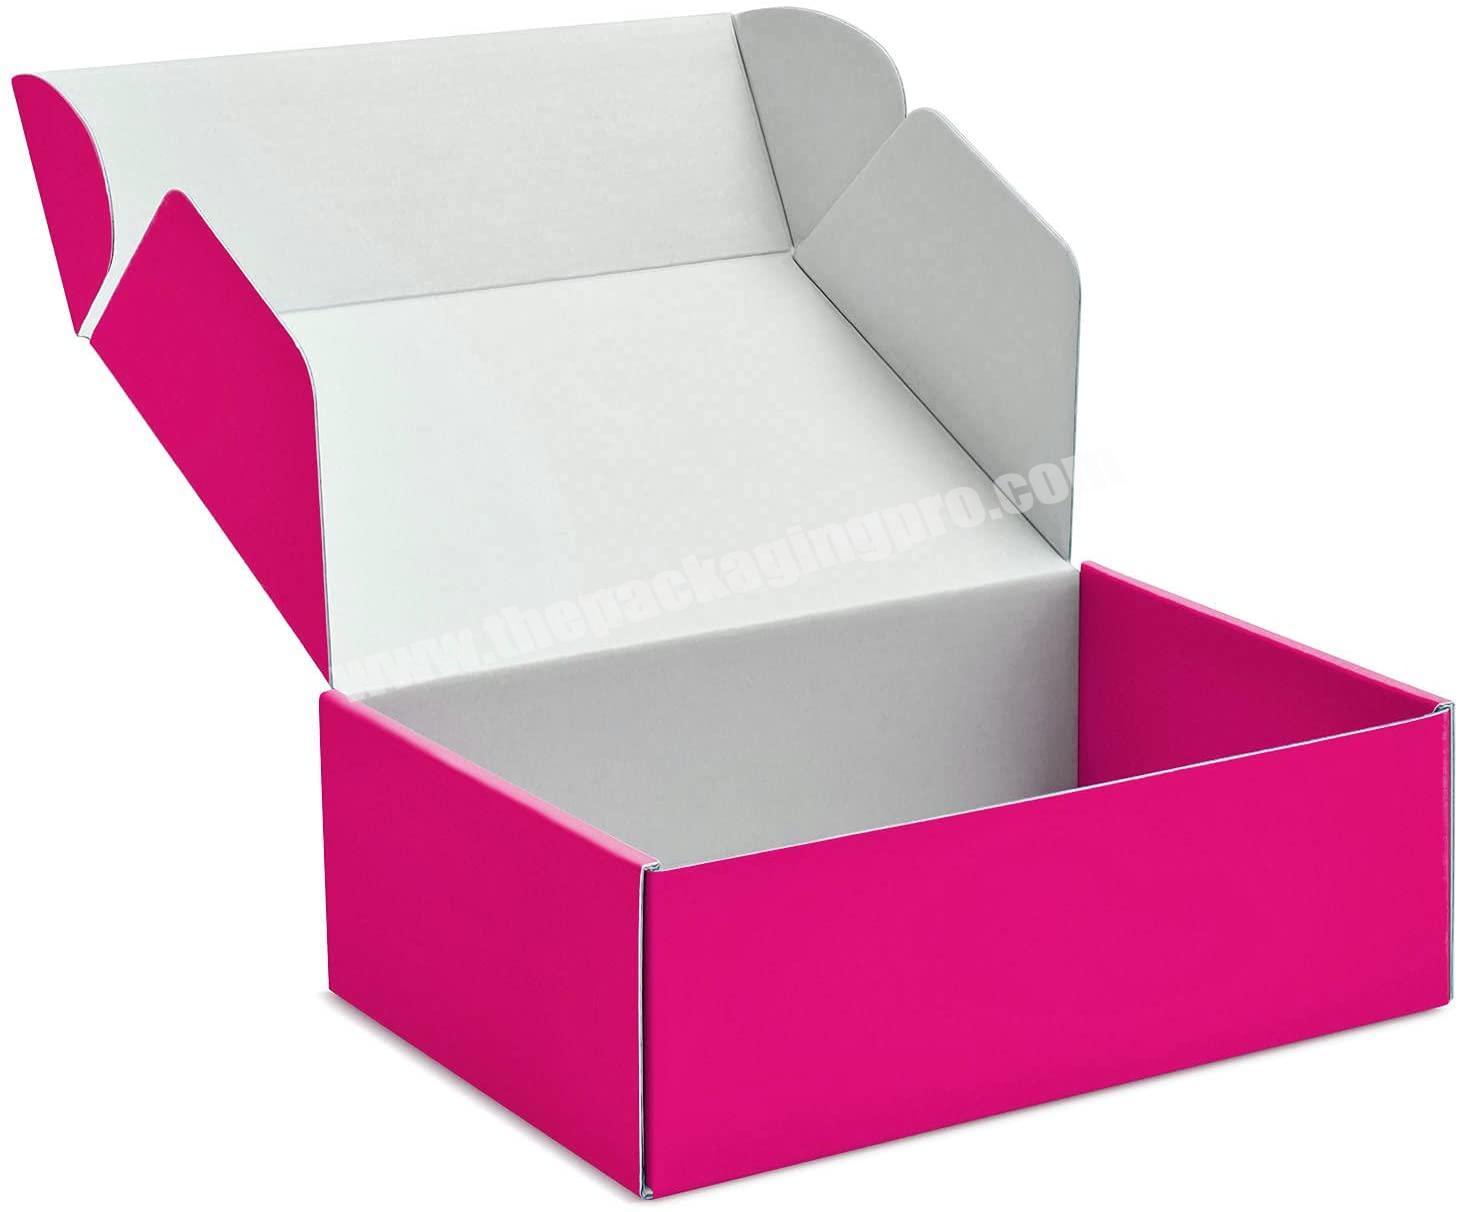 Jewelry Rose Pink Currogated Pink Corrugated Custom Printed Package Designed Large Boxes Shipping White Mailer Kraft Paper